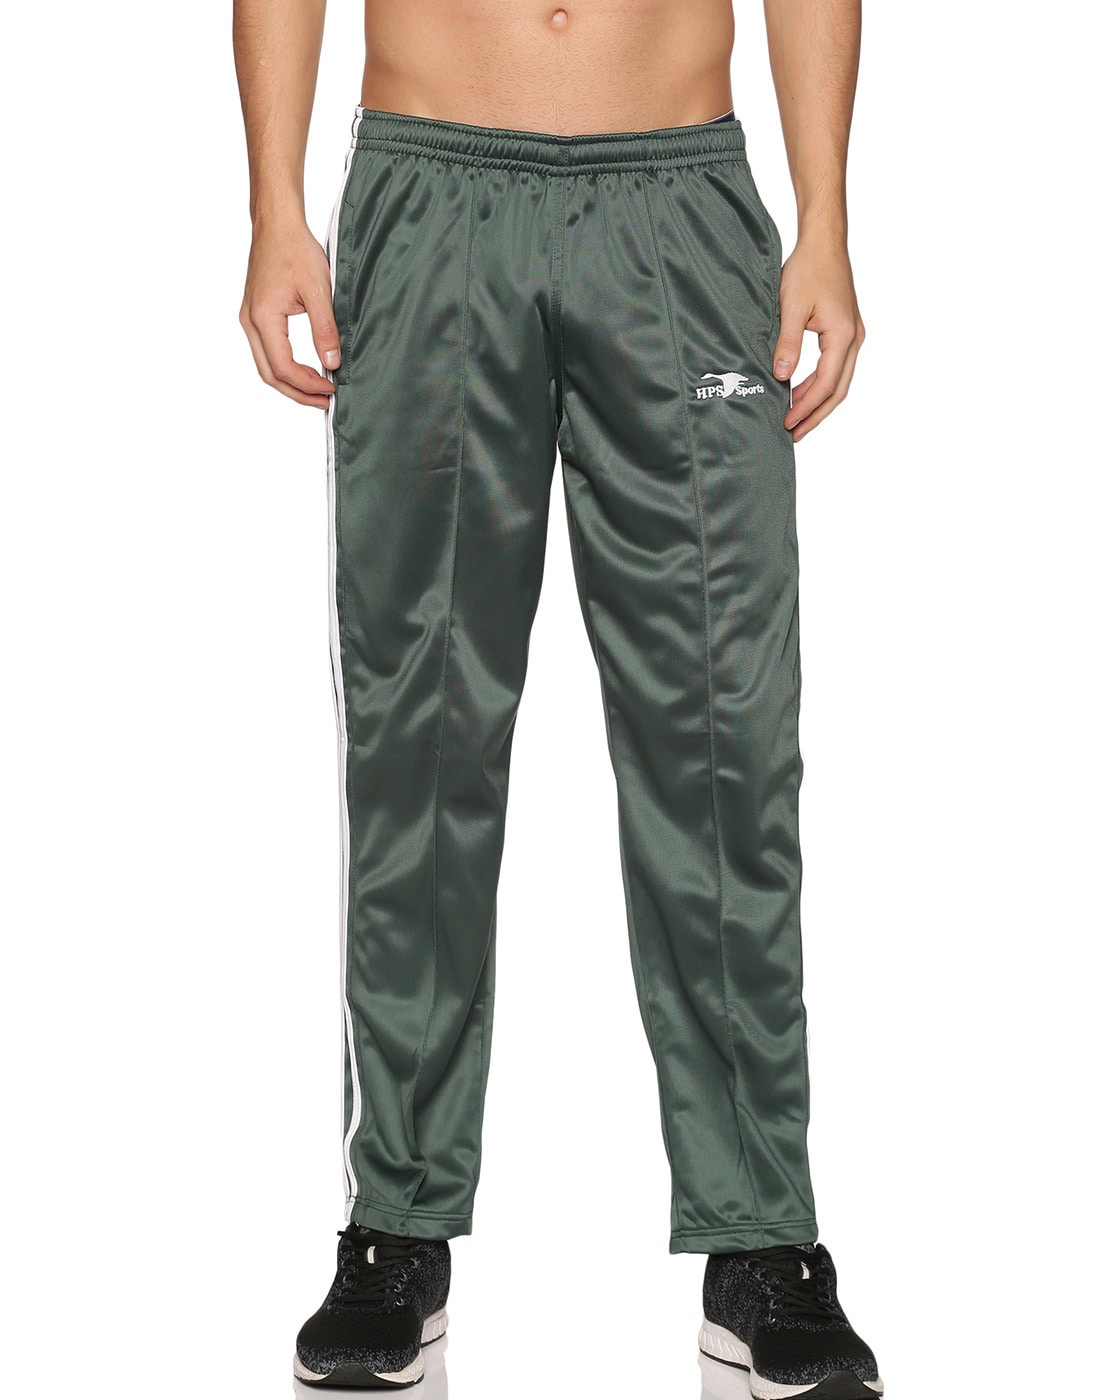 Trackpants Shop Online Men Airforce Blue Polyester Trackpants on Cliths